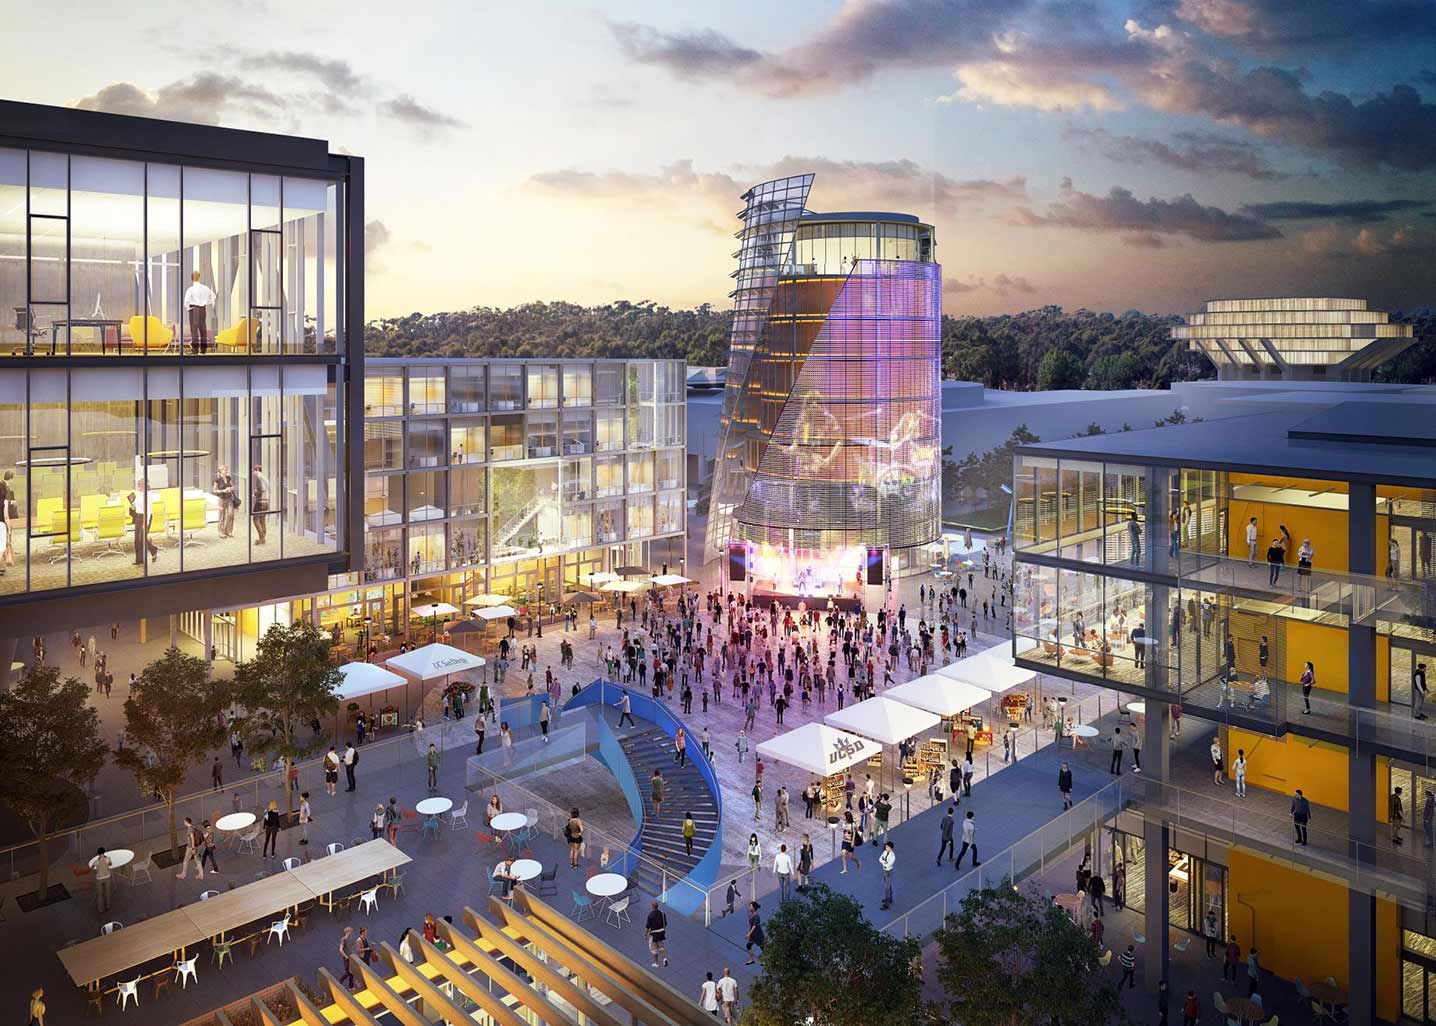 UC San Diego slated to build a new campus "front door"